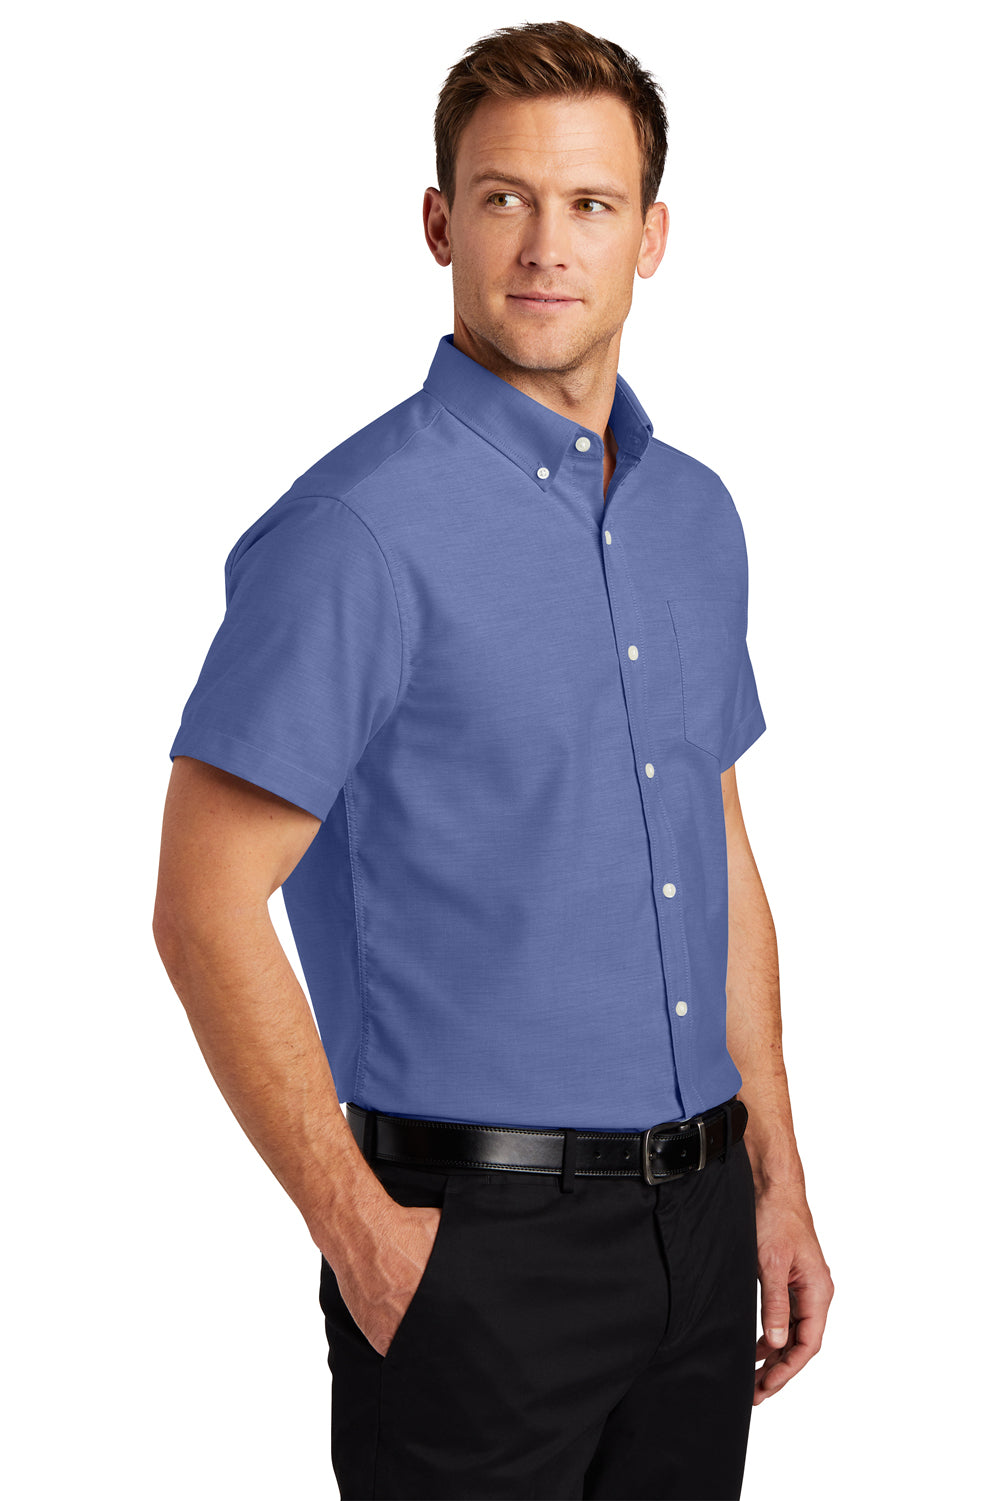 Port Authority S659 SuperPro Oxford Wrinkle Resistant Short Sleeve Button Down Shirt w/ Pocket Navy Blue 3Q